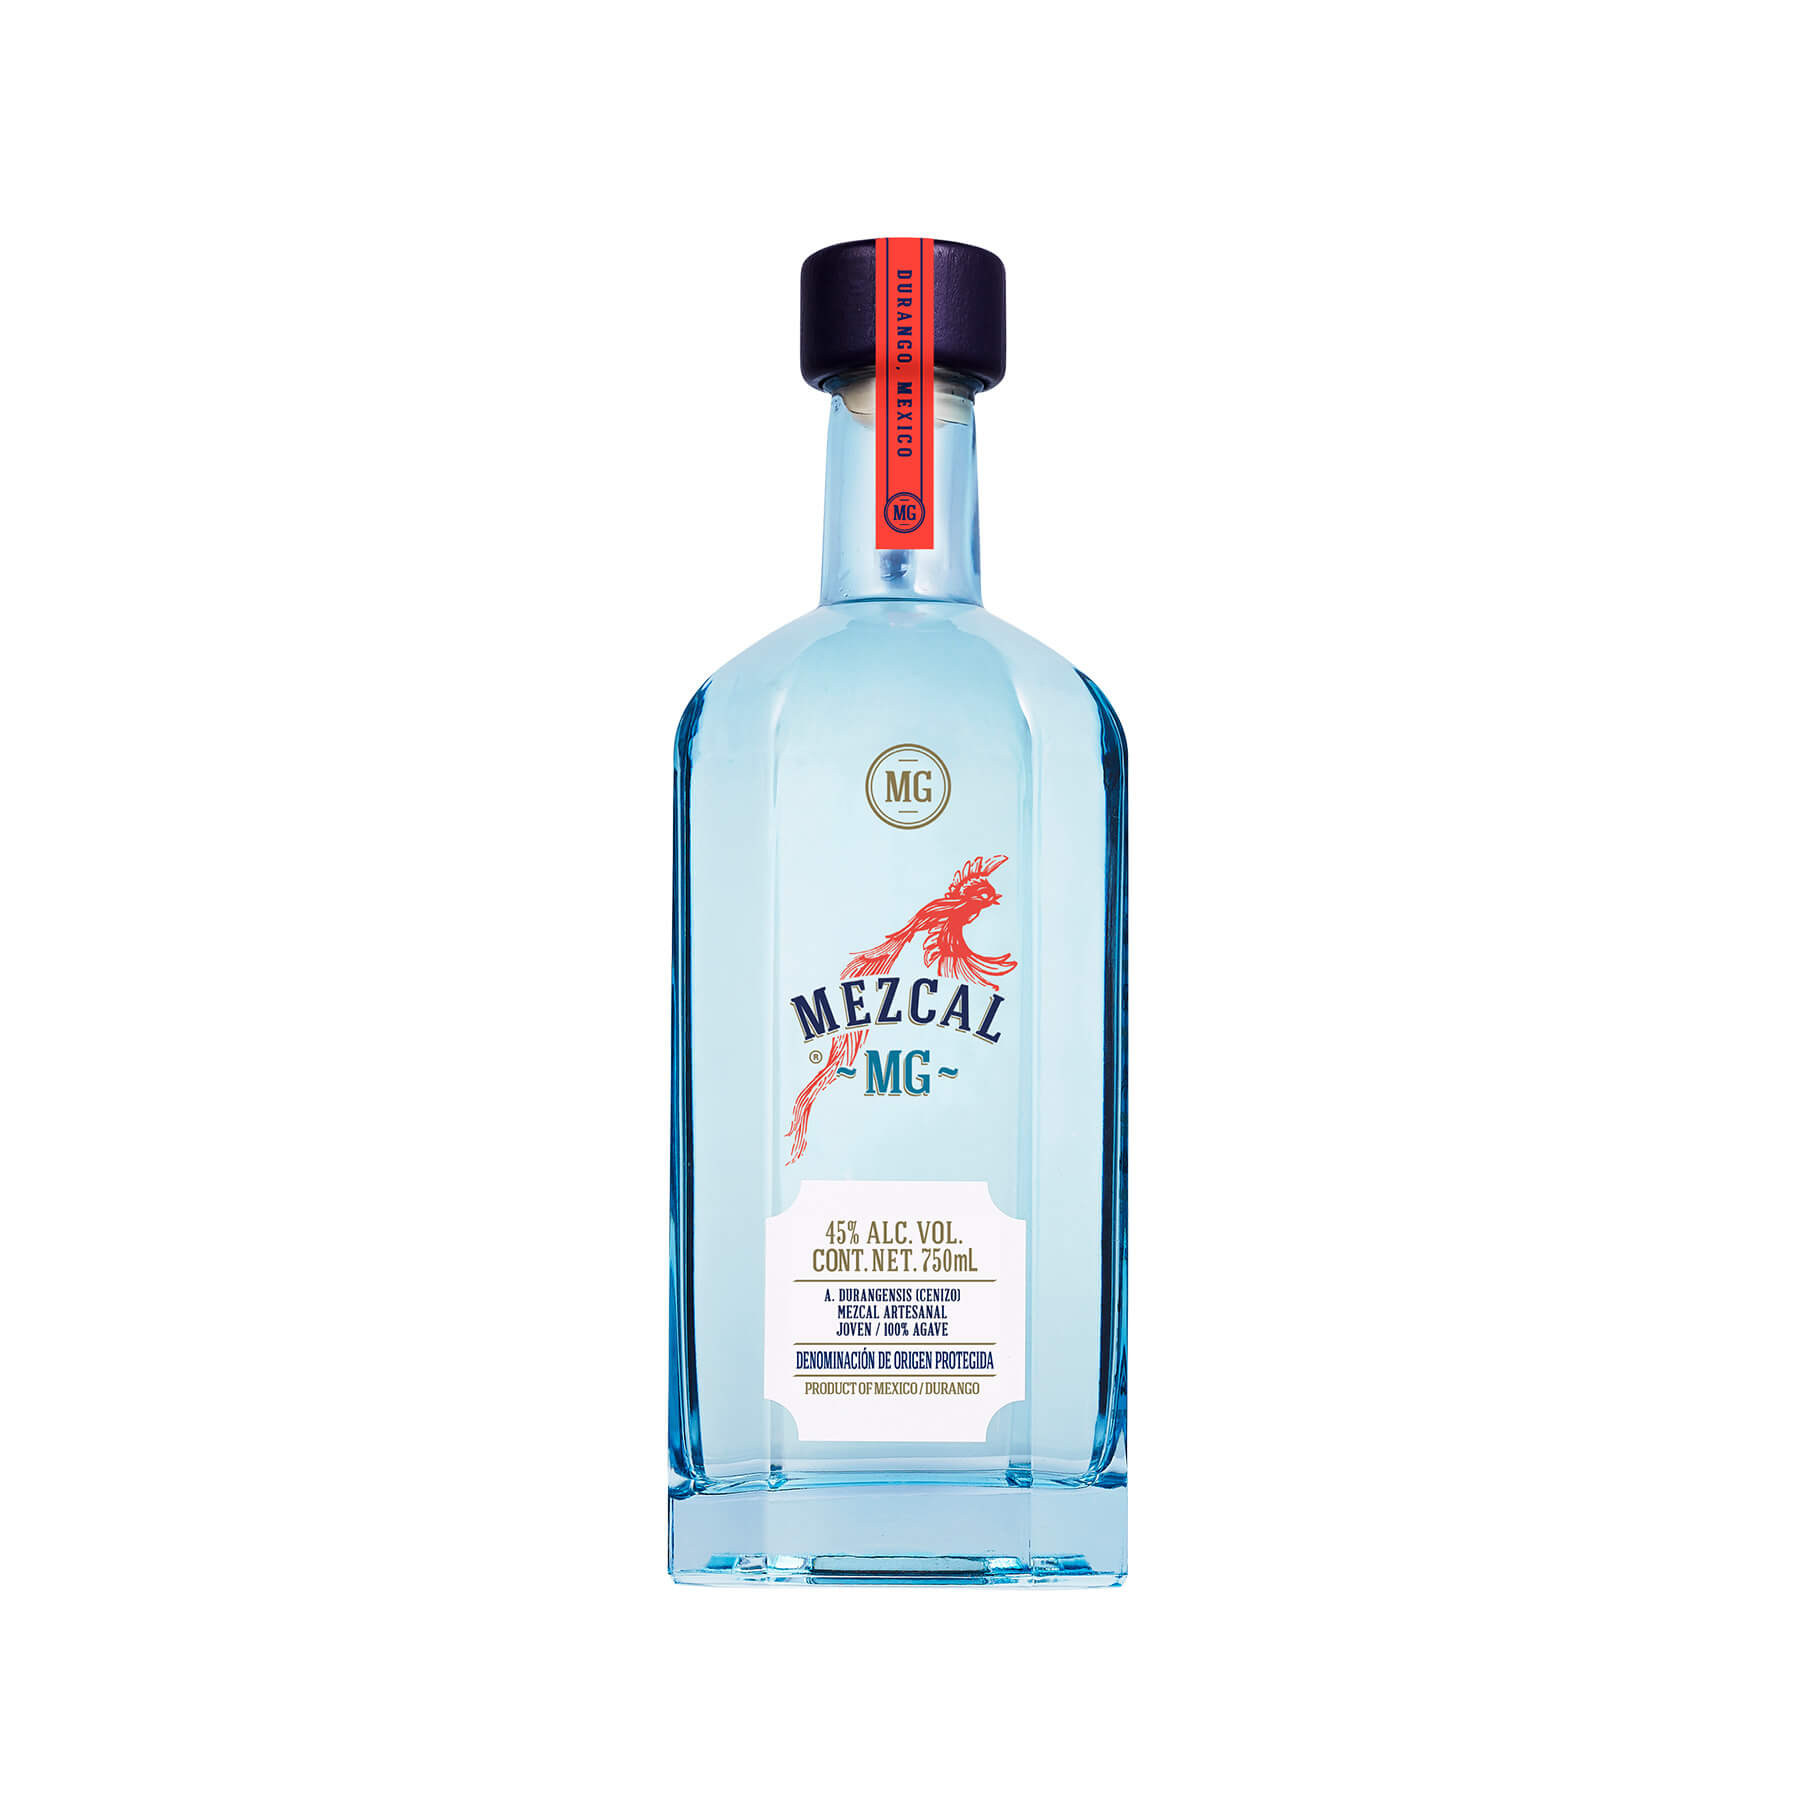 Product image for “MG Mezcal Gin”